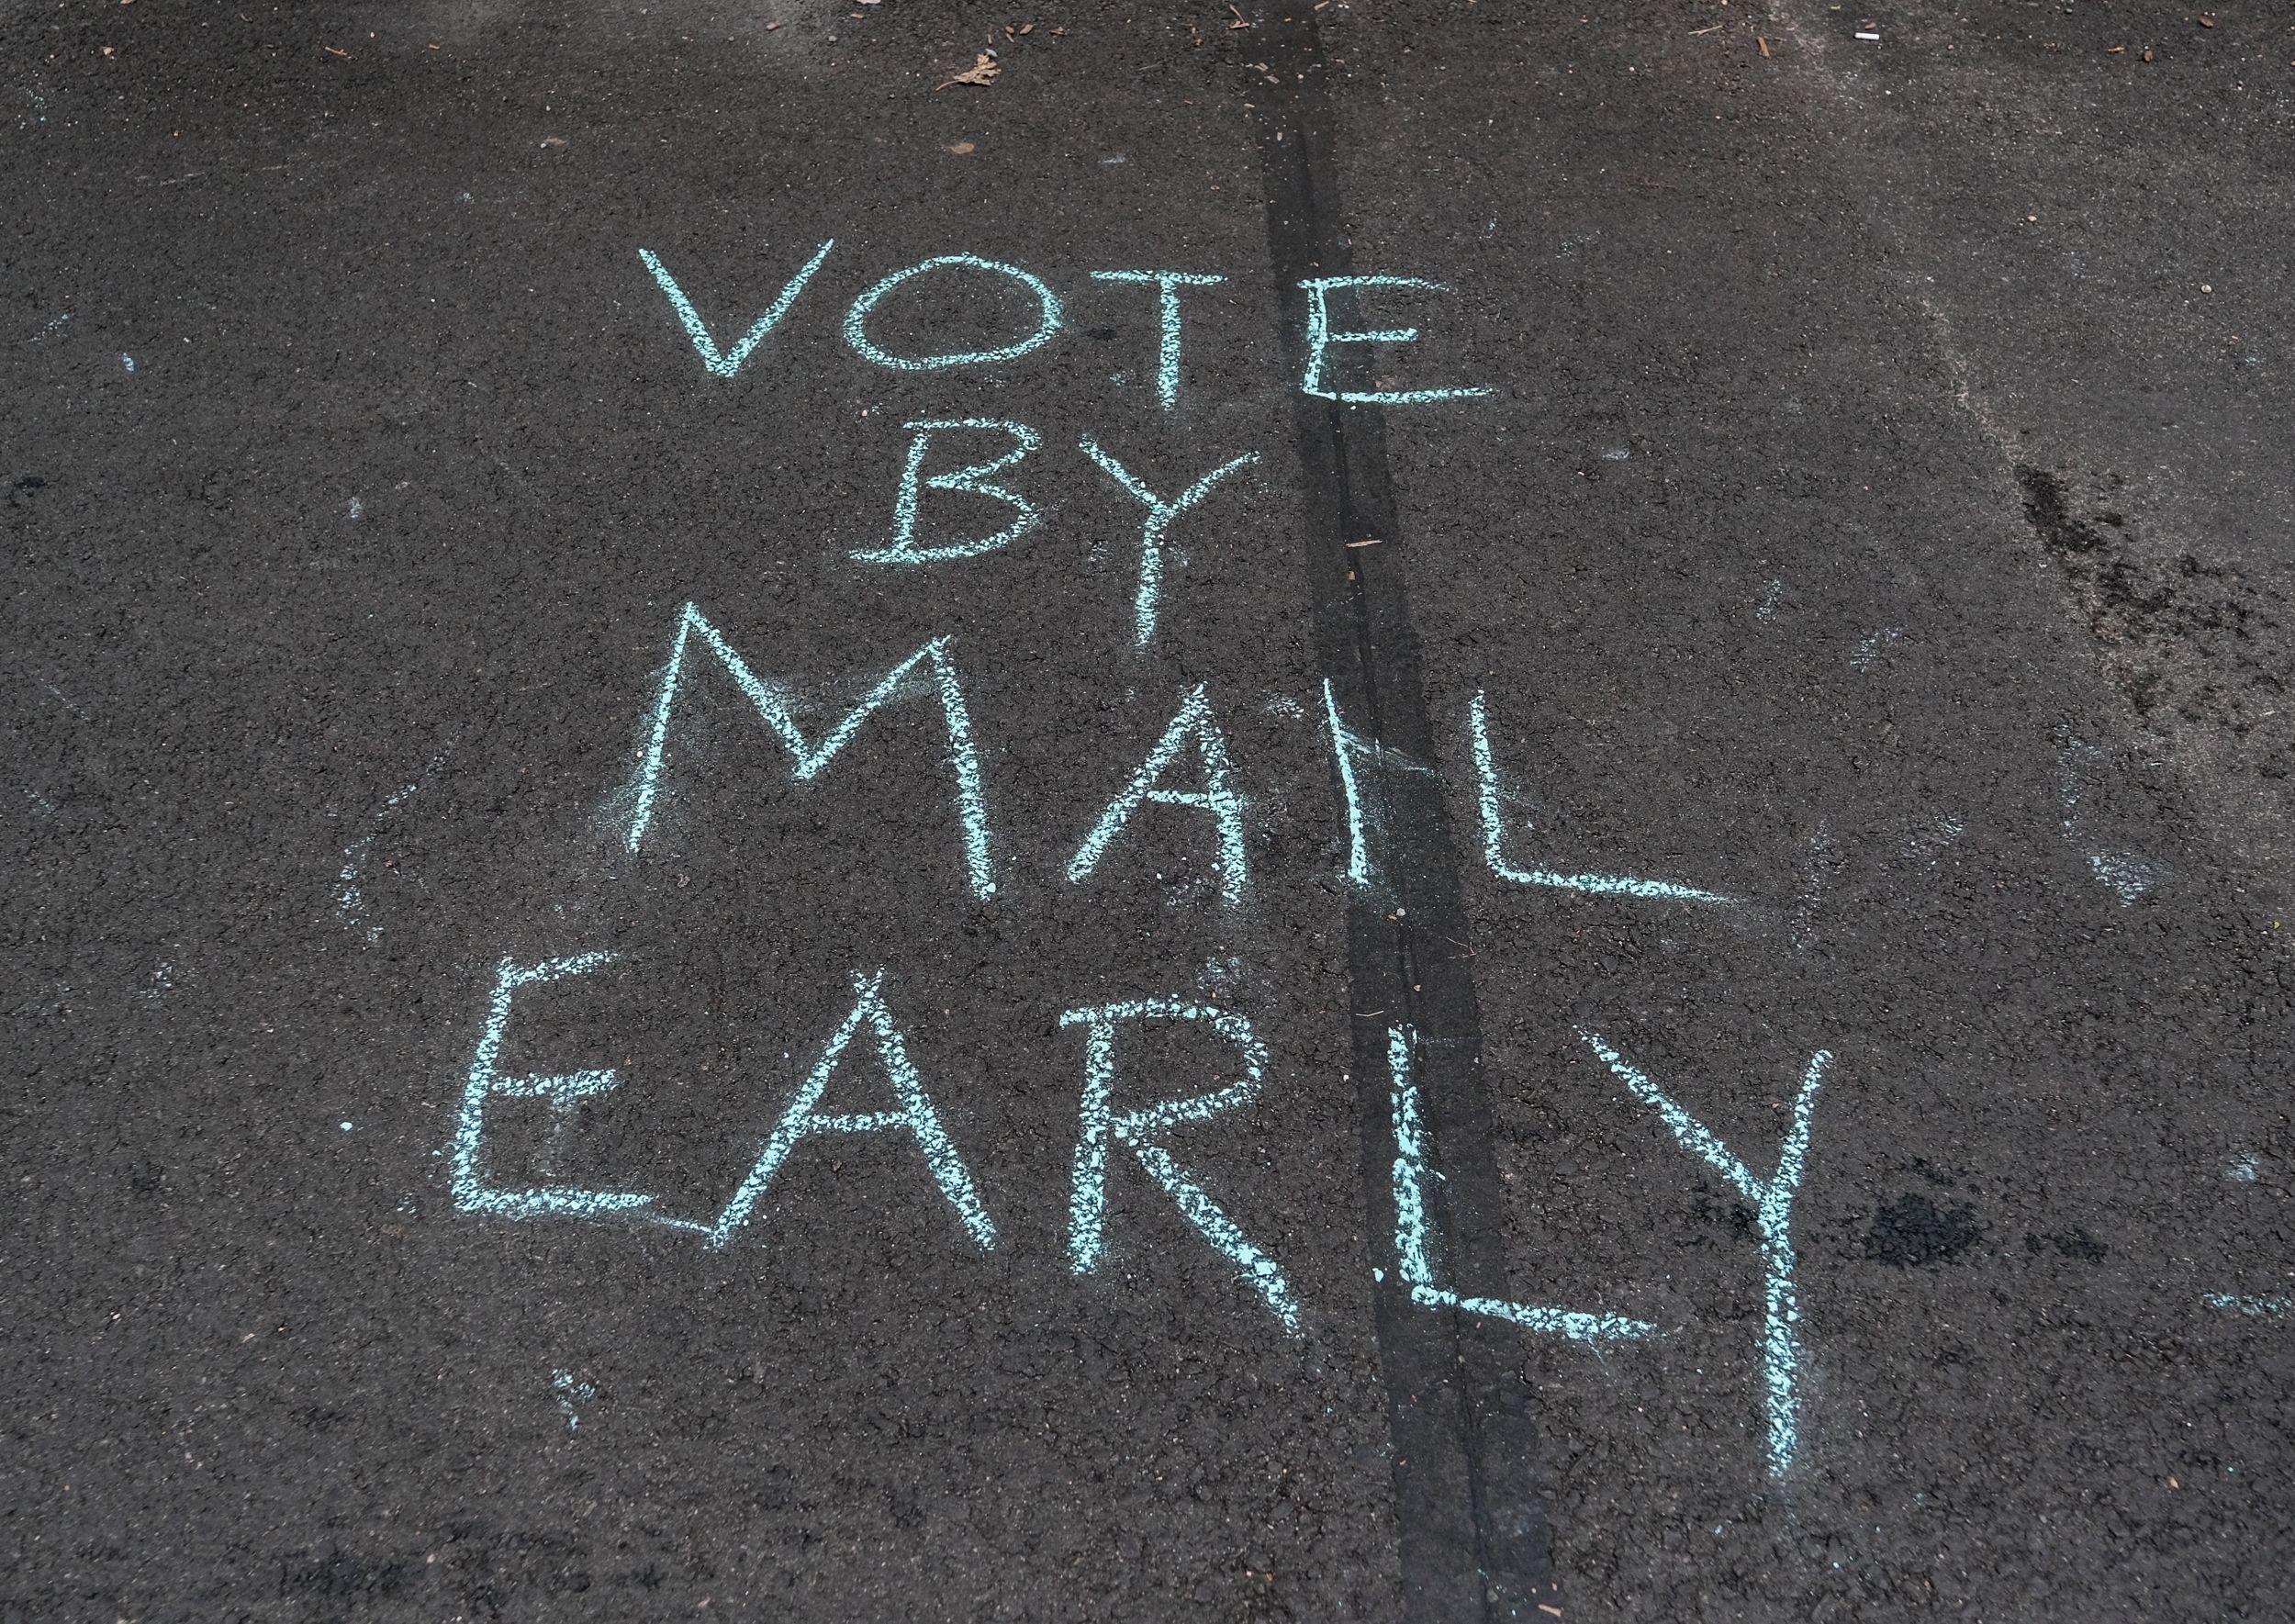 Make sure you send the ballot by mail as soon as possible.